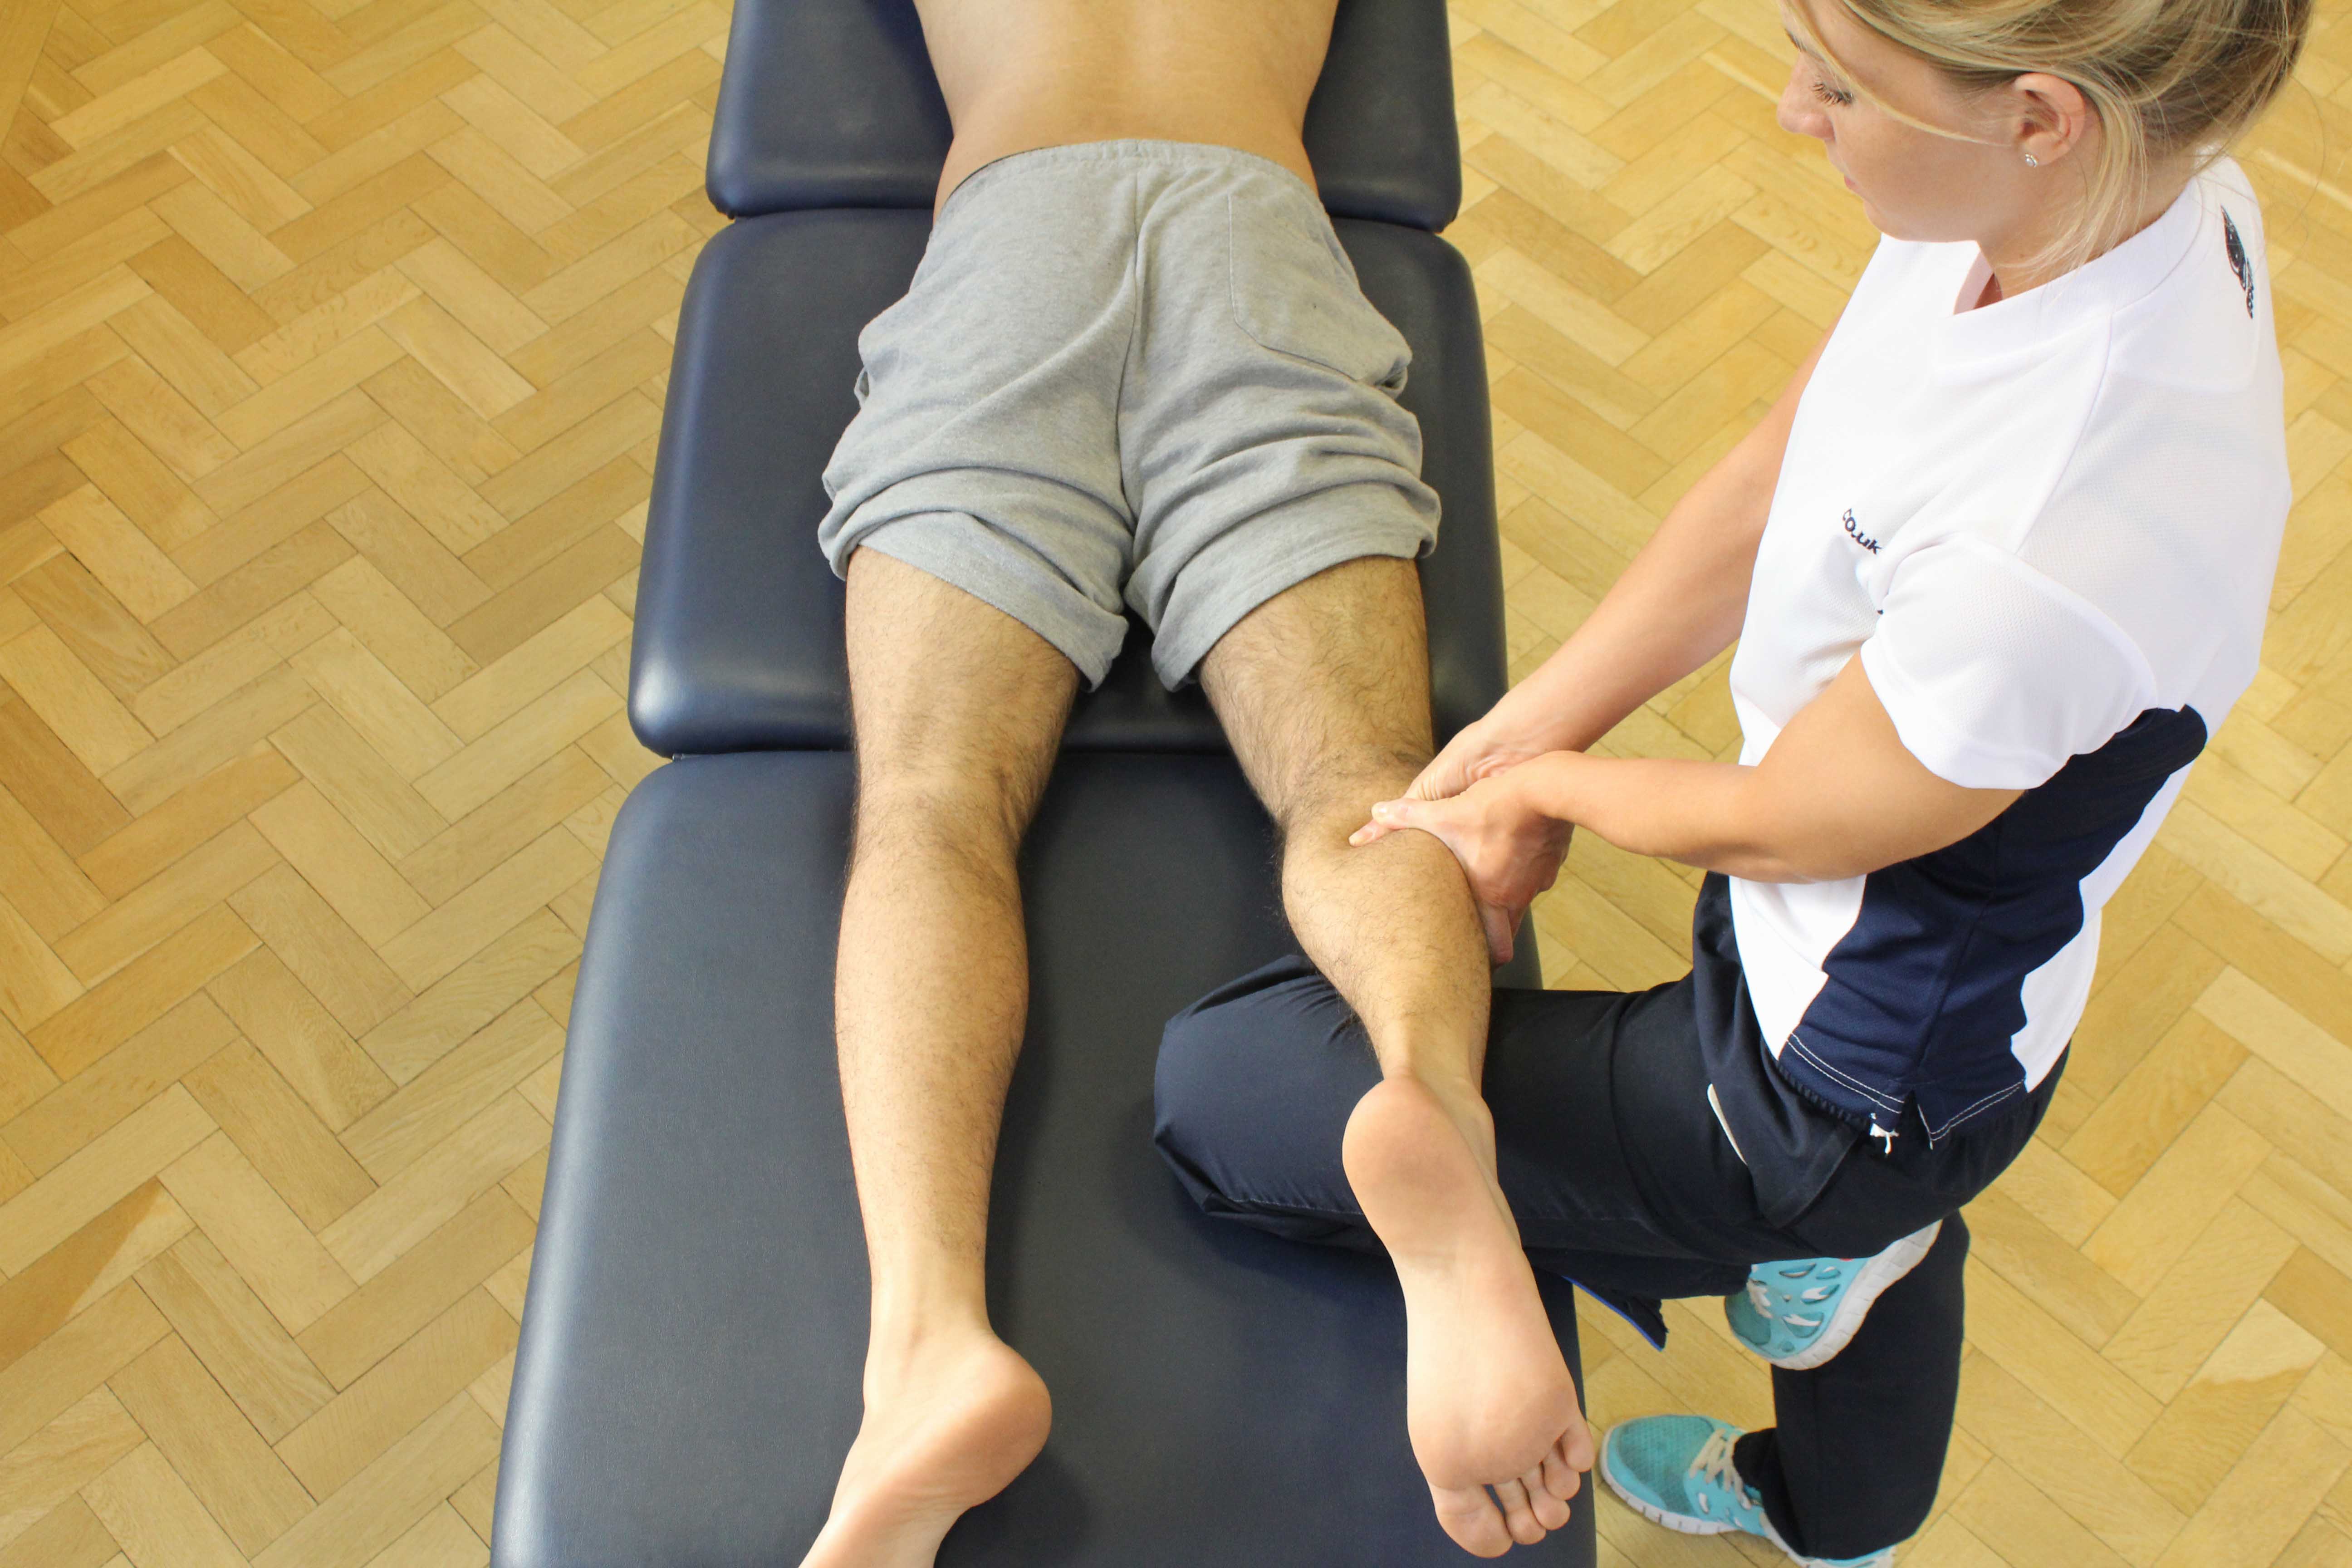 Trigger point massage applied to gastrocnemius muscle by specilaist therapist